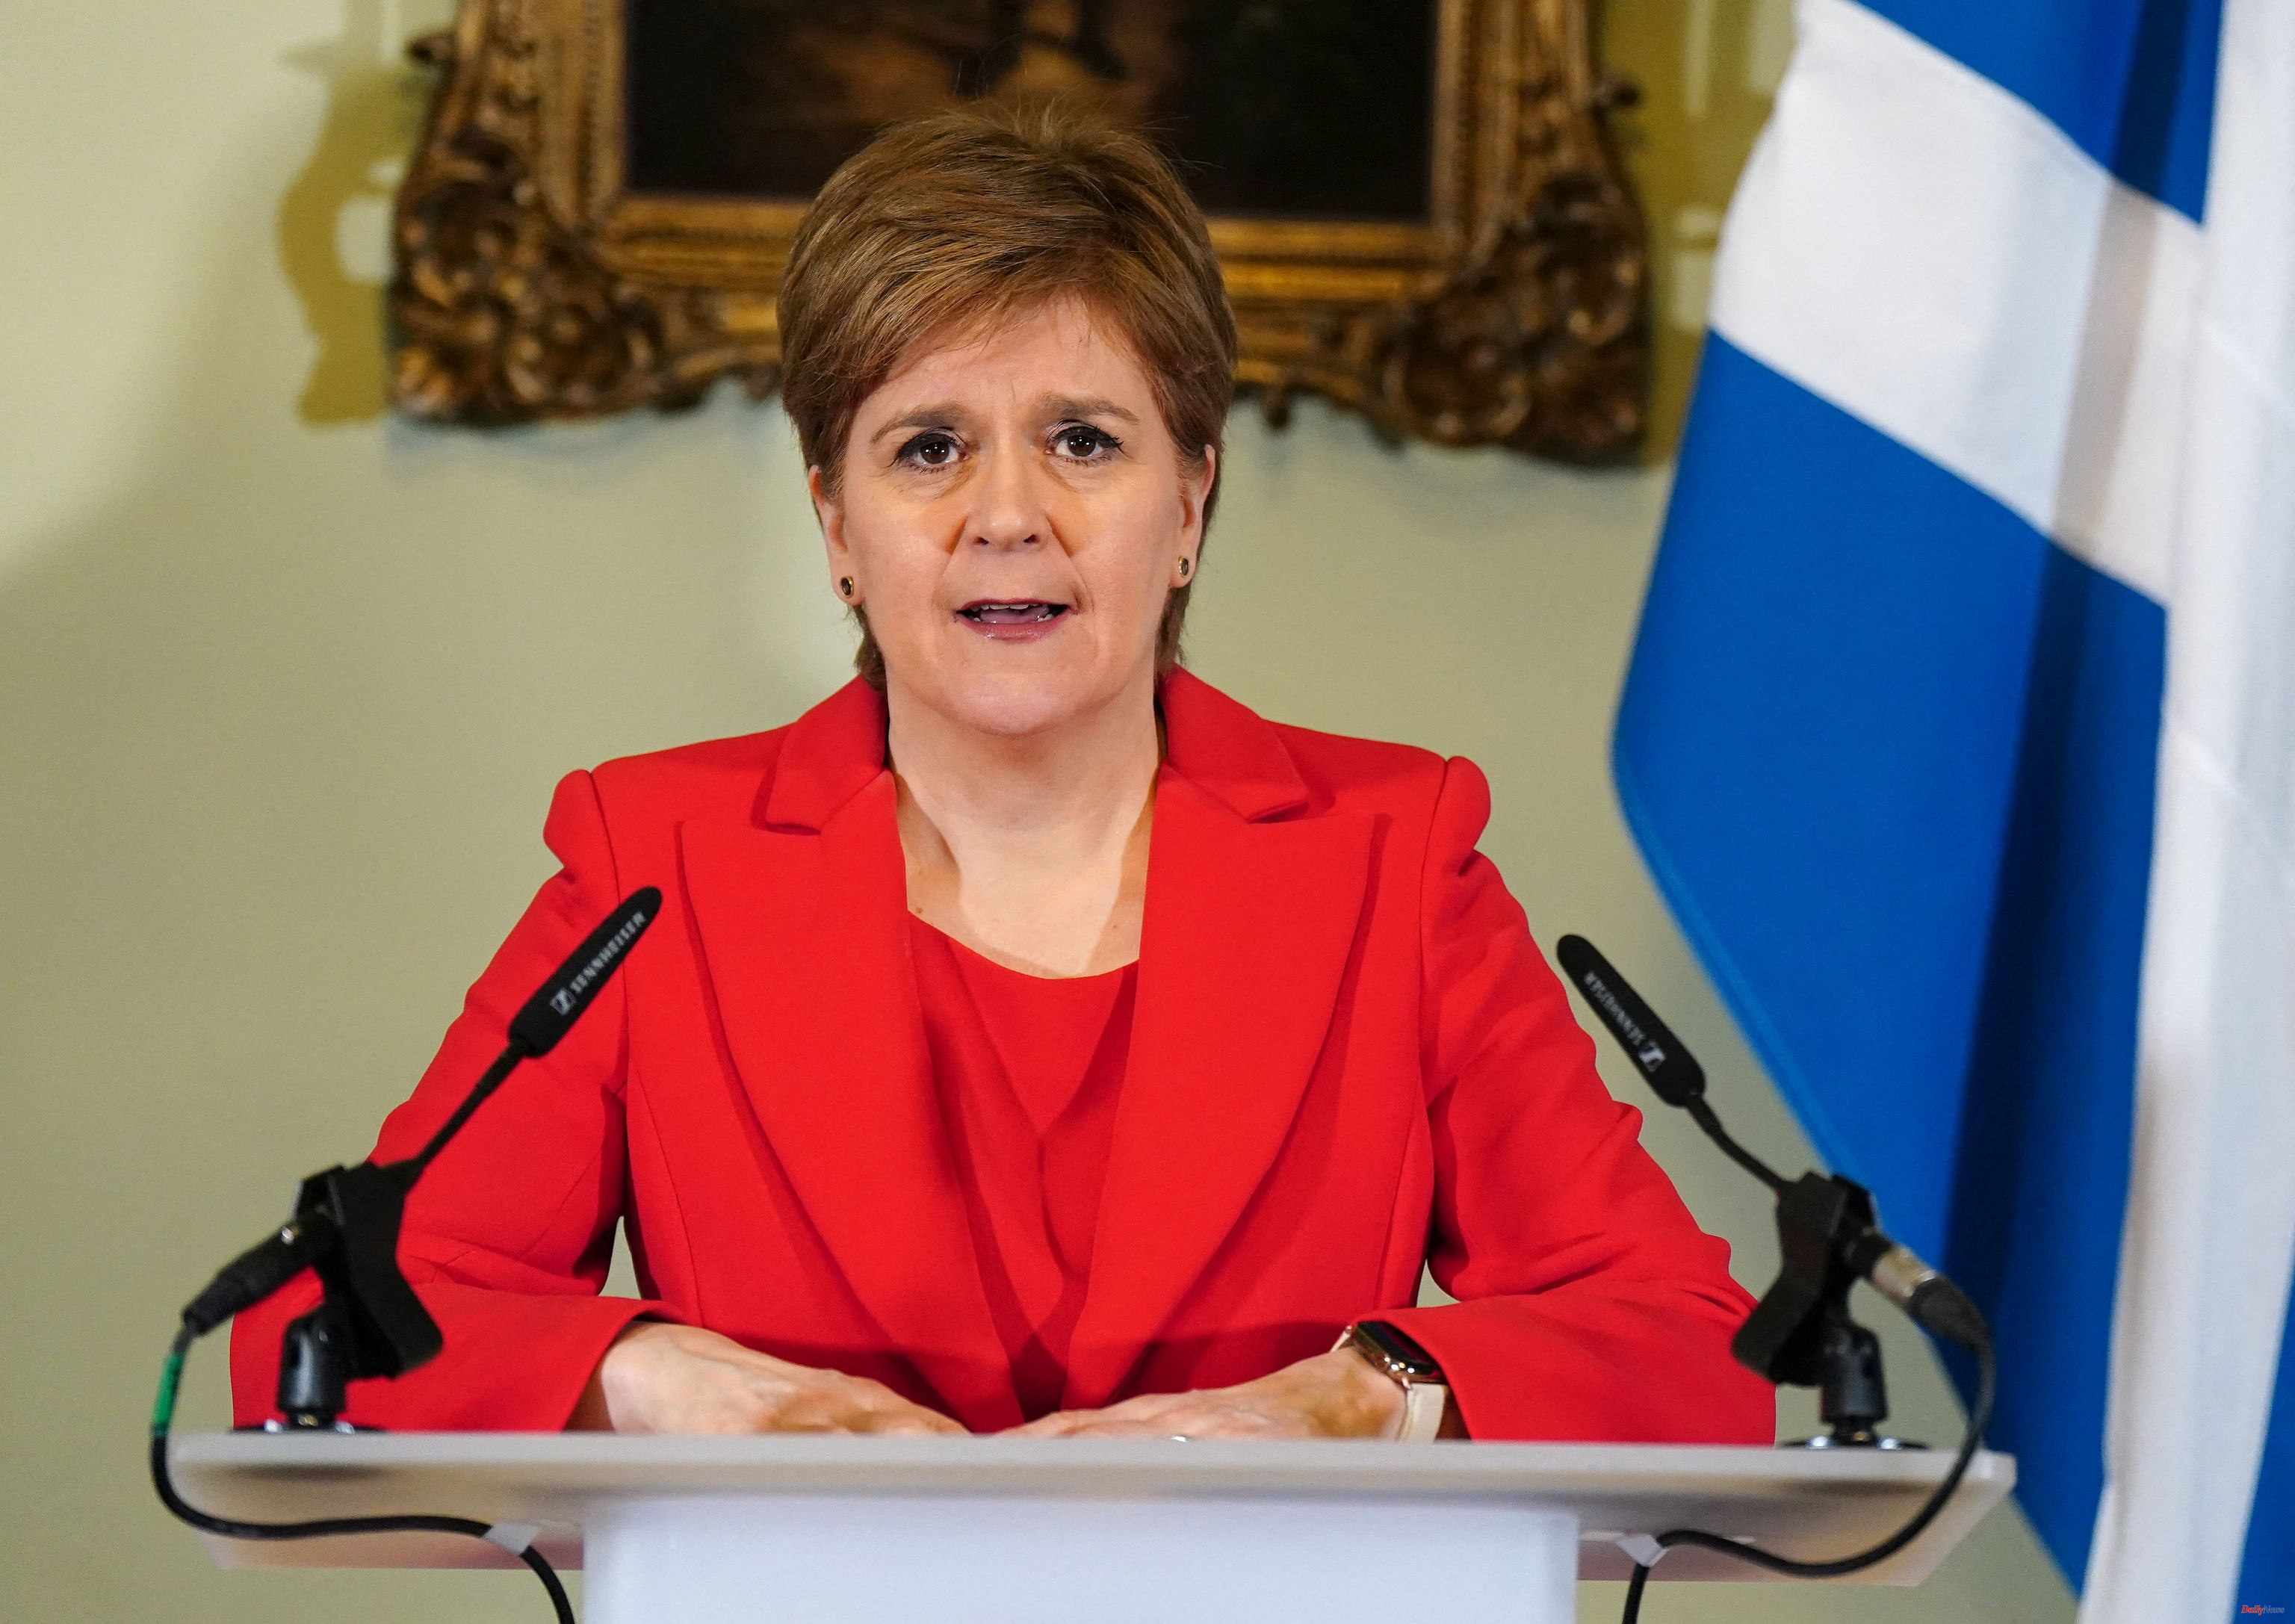 UK Police investigate Scottish National Party for fraud